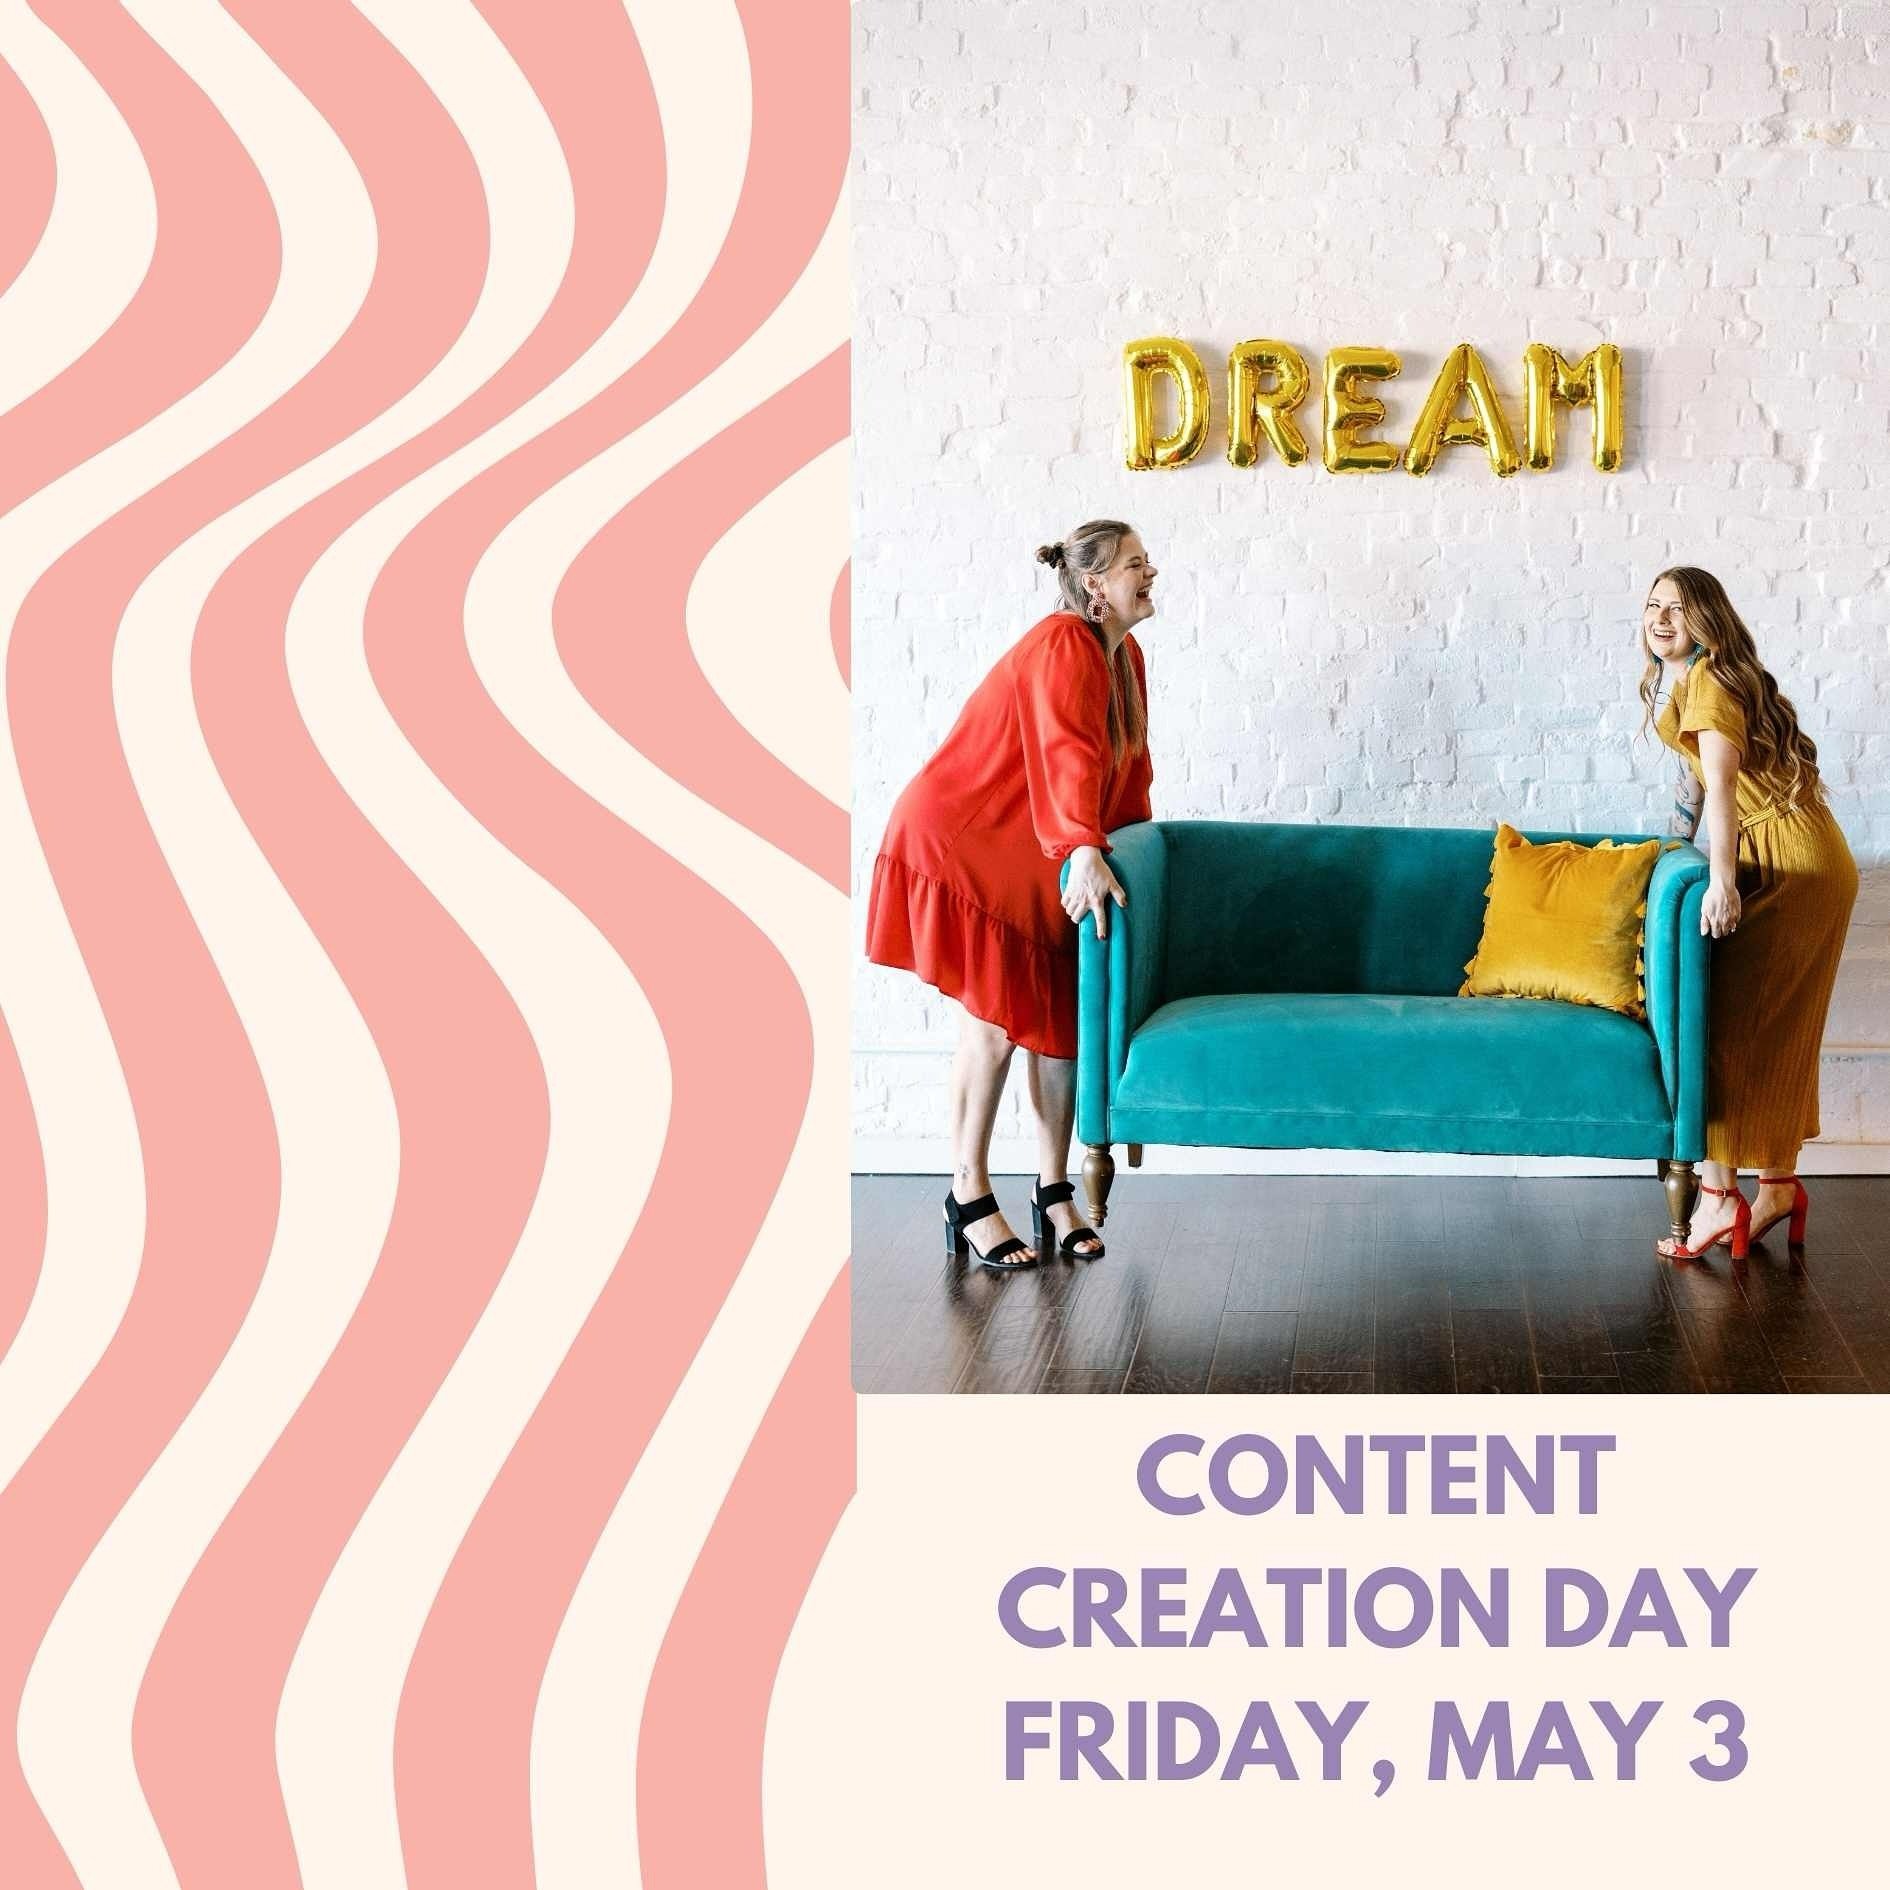 Exciting news!!! We found with our last Content Creation Day our space is roomy enough to continue opening it up to non-members. CC Day happens the first Friday of the month during regular business hours 8-6, so mark your calendar for next Friday! Be